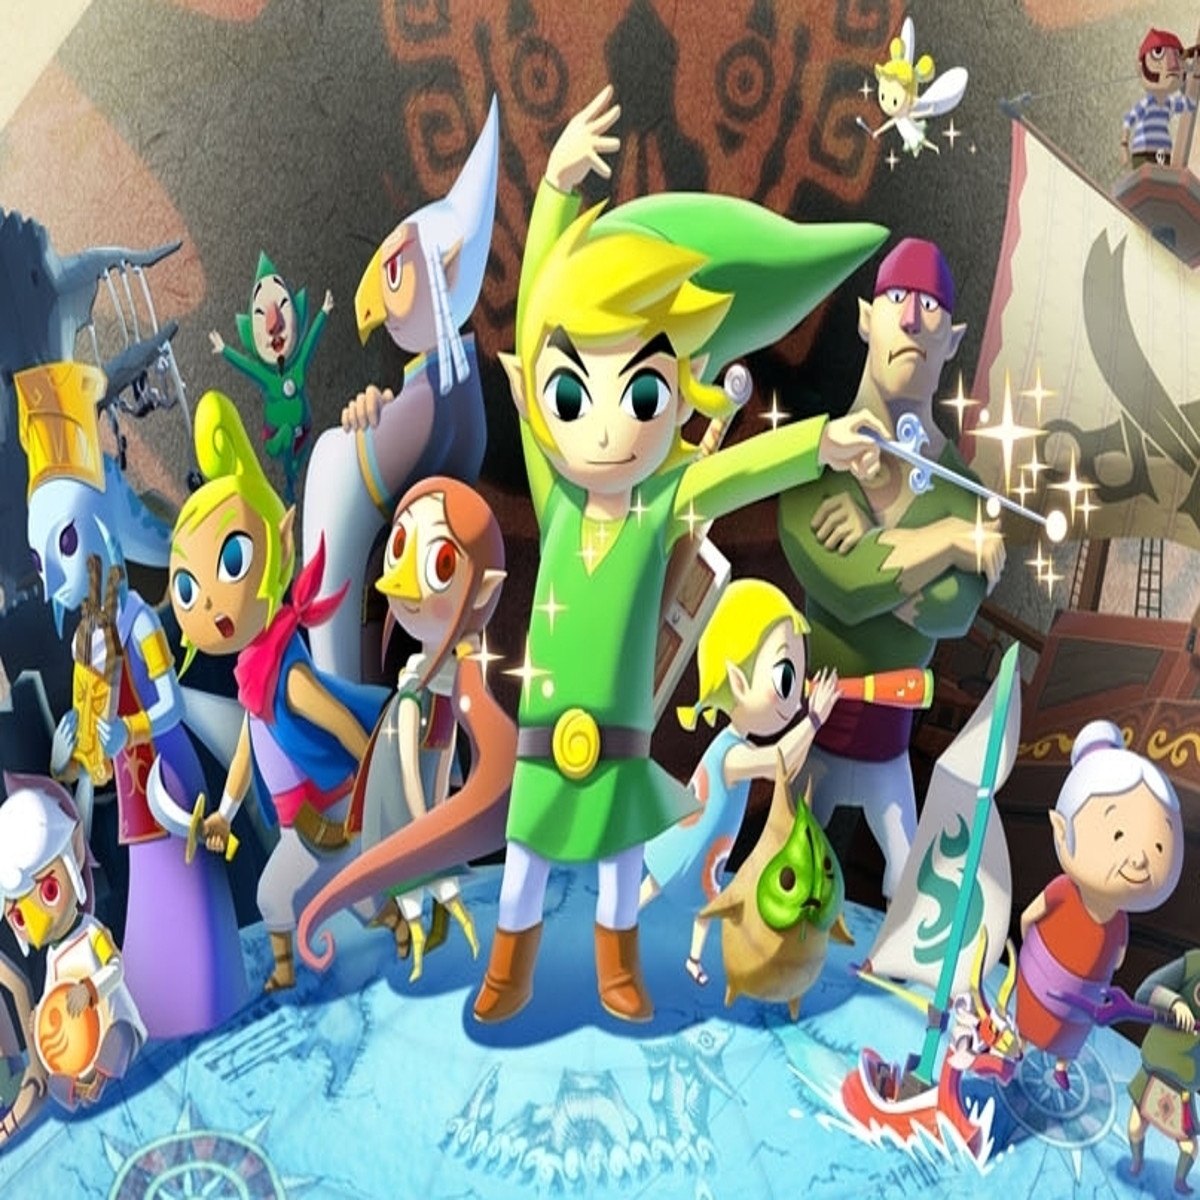 The Legend of Zelda: The Wind Waker,' one of the best Wii U games